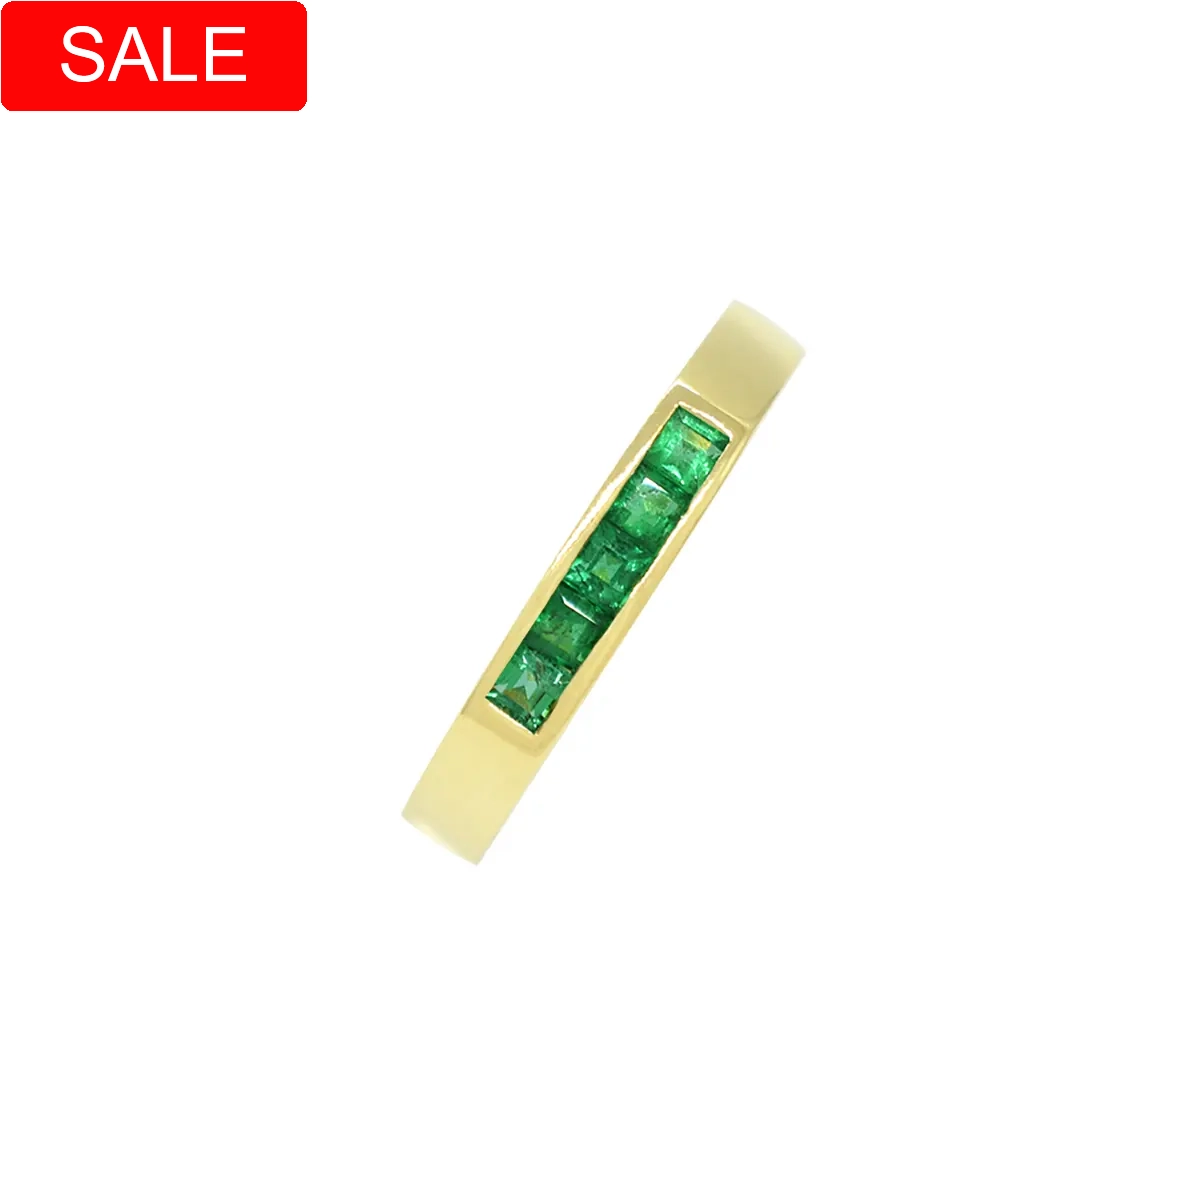 Small 18K gold emerald wedding band ring with 5 square cut natural Colombian emeralds in smooth channel setting